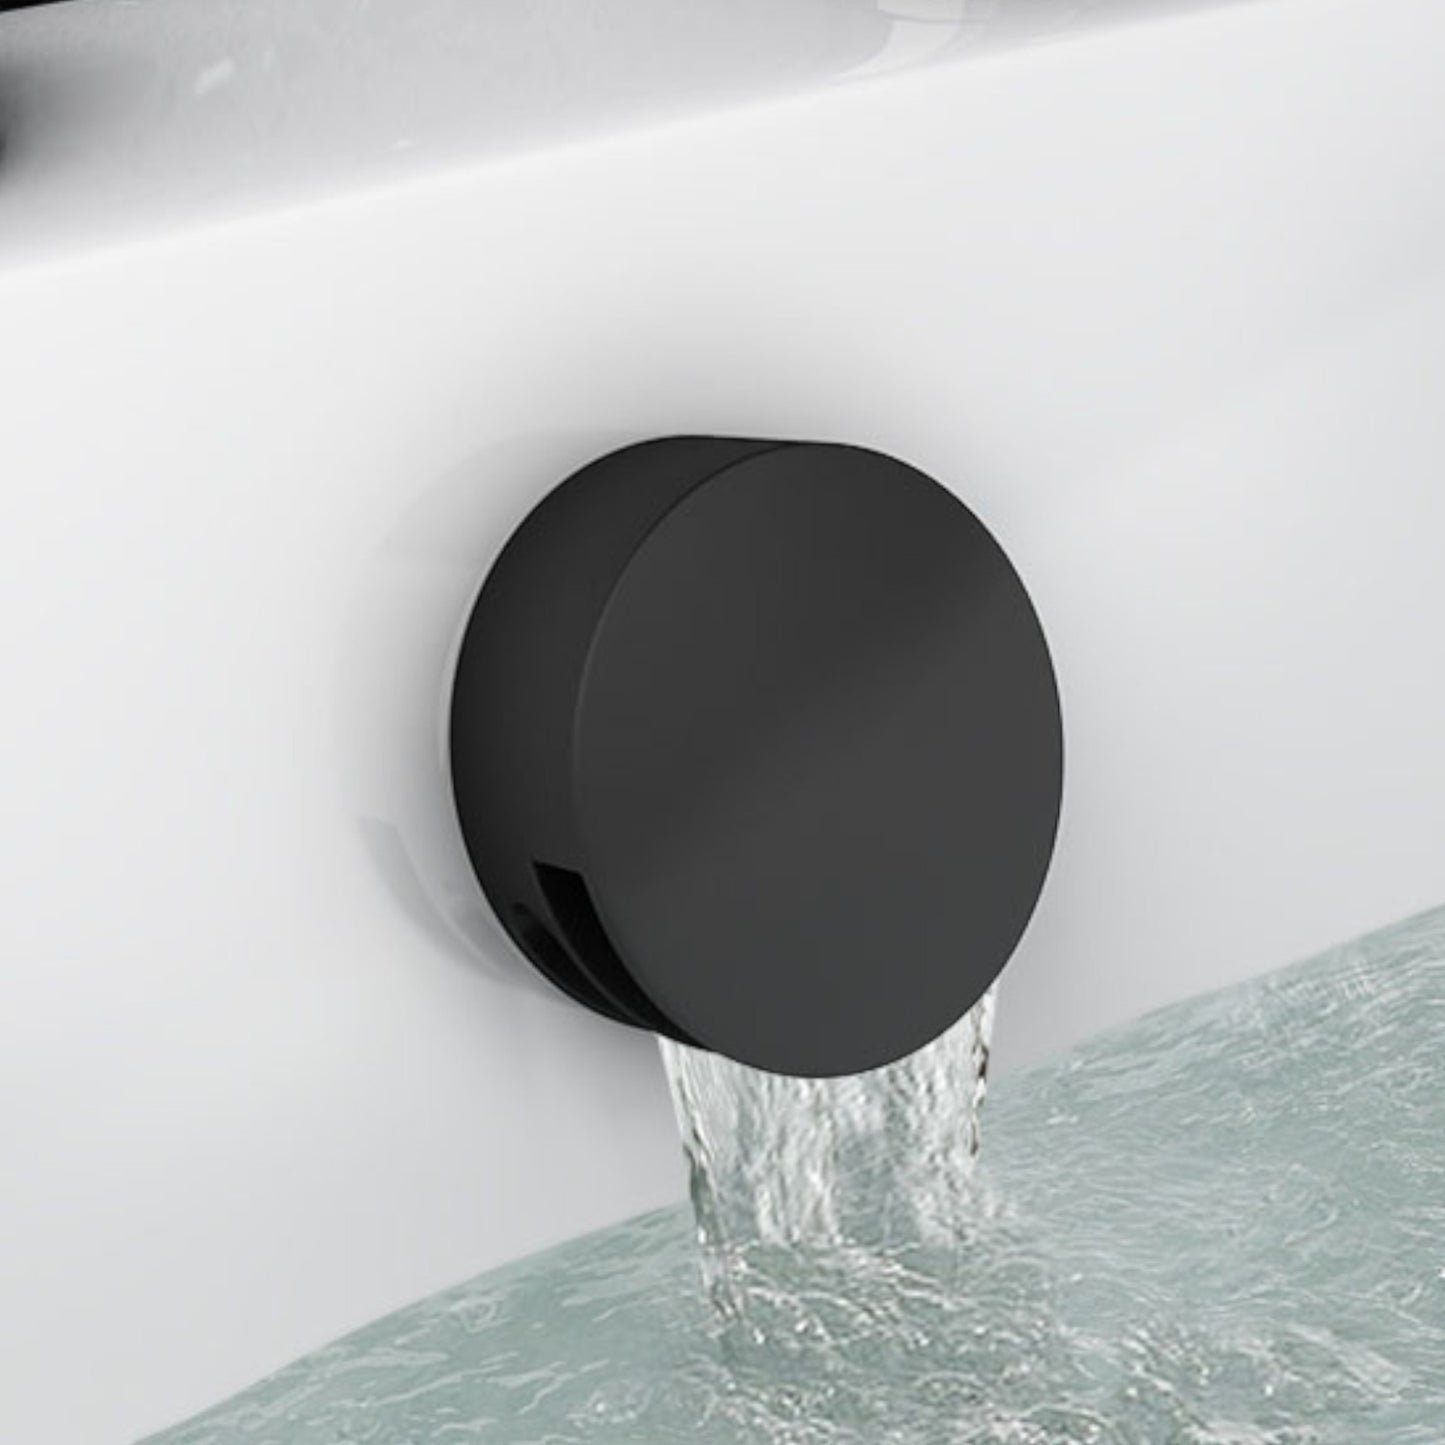 Venice Contemporary Round Concealed Thermostatic Shower Set Incl. Triple Diverter Valve, Wall Fixed 8" Shower Head, Slider Rail Kit, Bath Filler Waste with Overflow - Matte Black (3 Outlet)